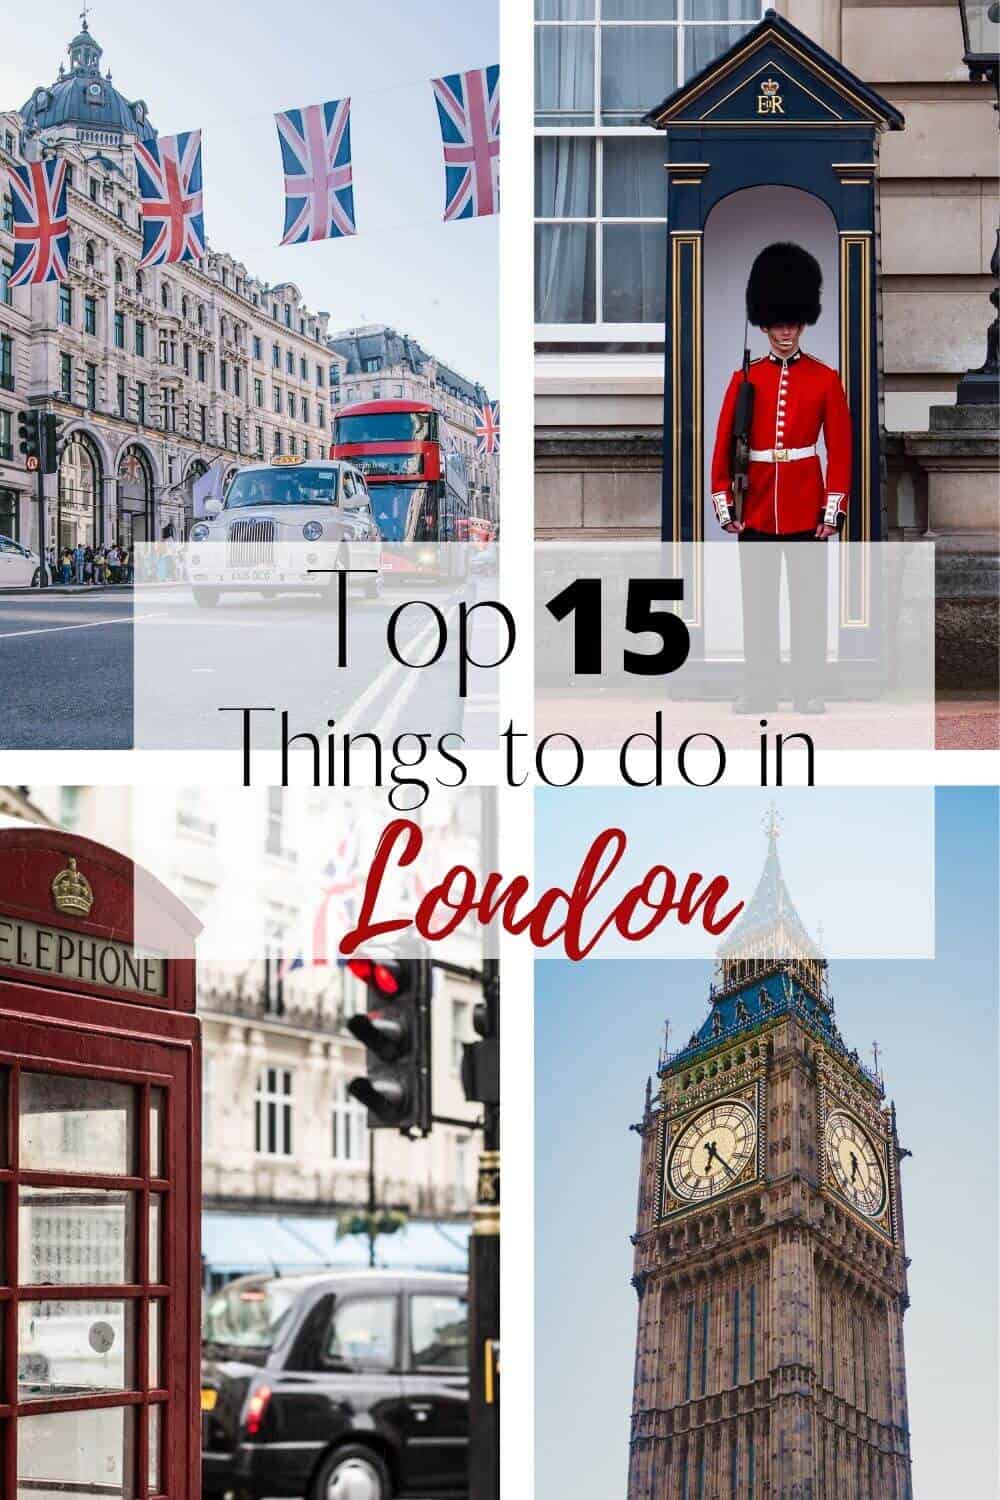 Top 15 Things to do in London